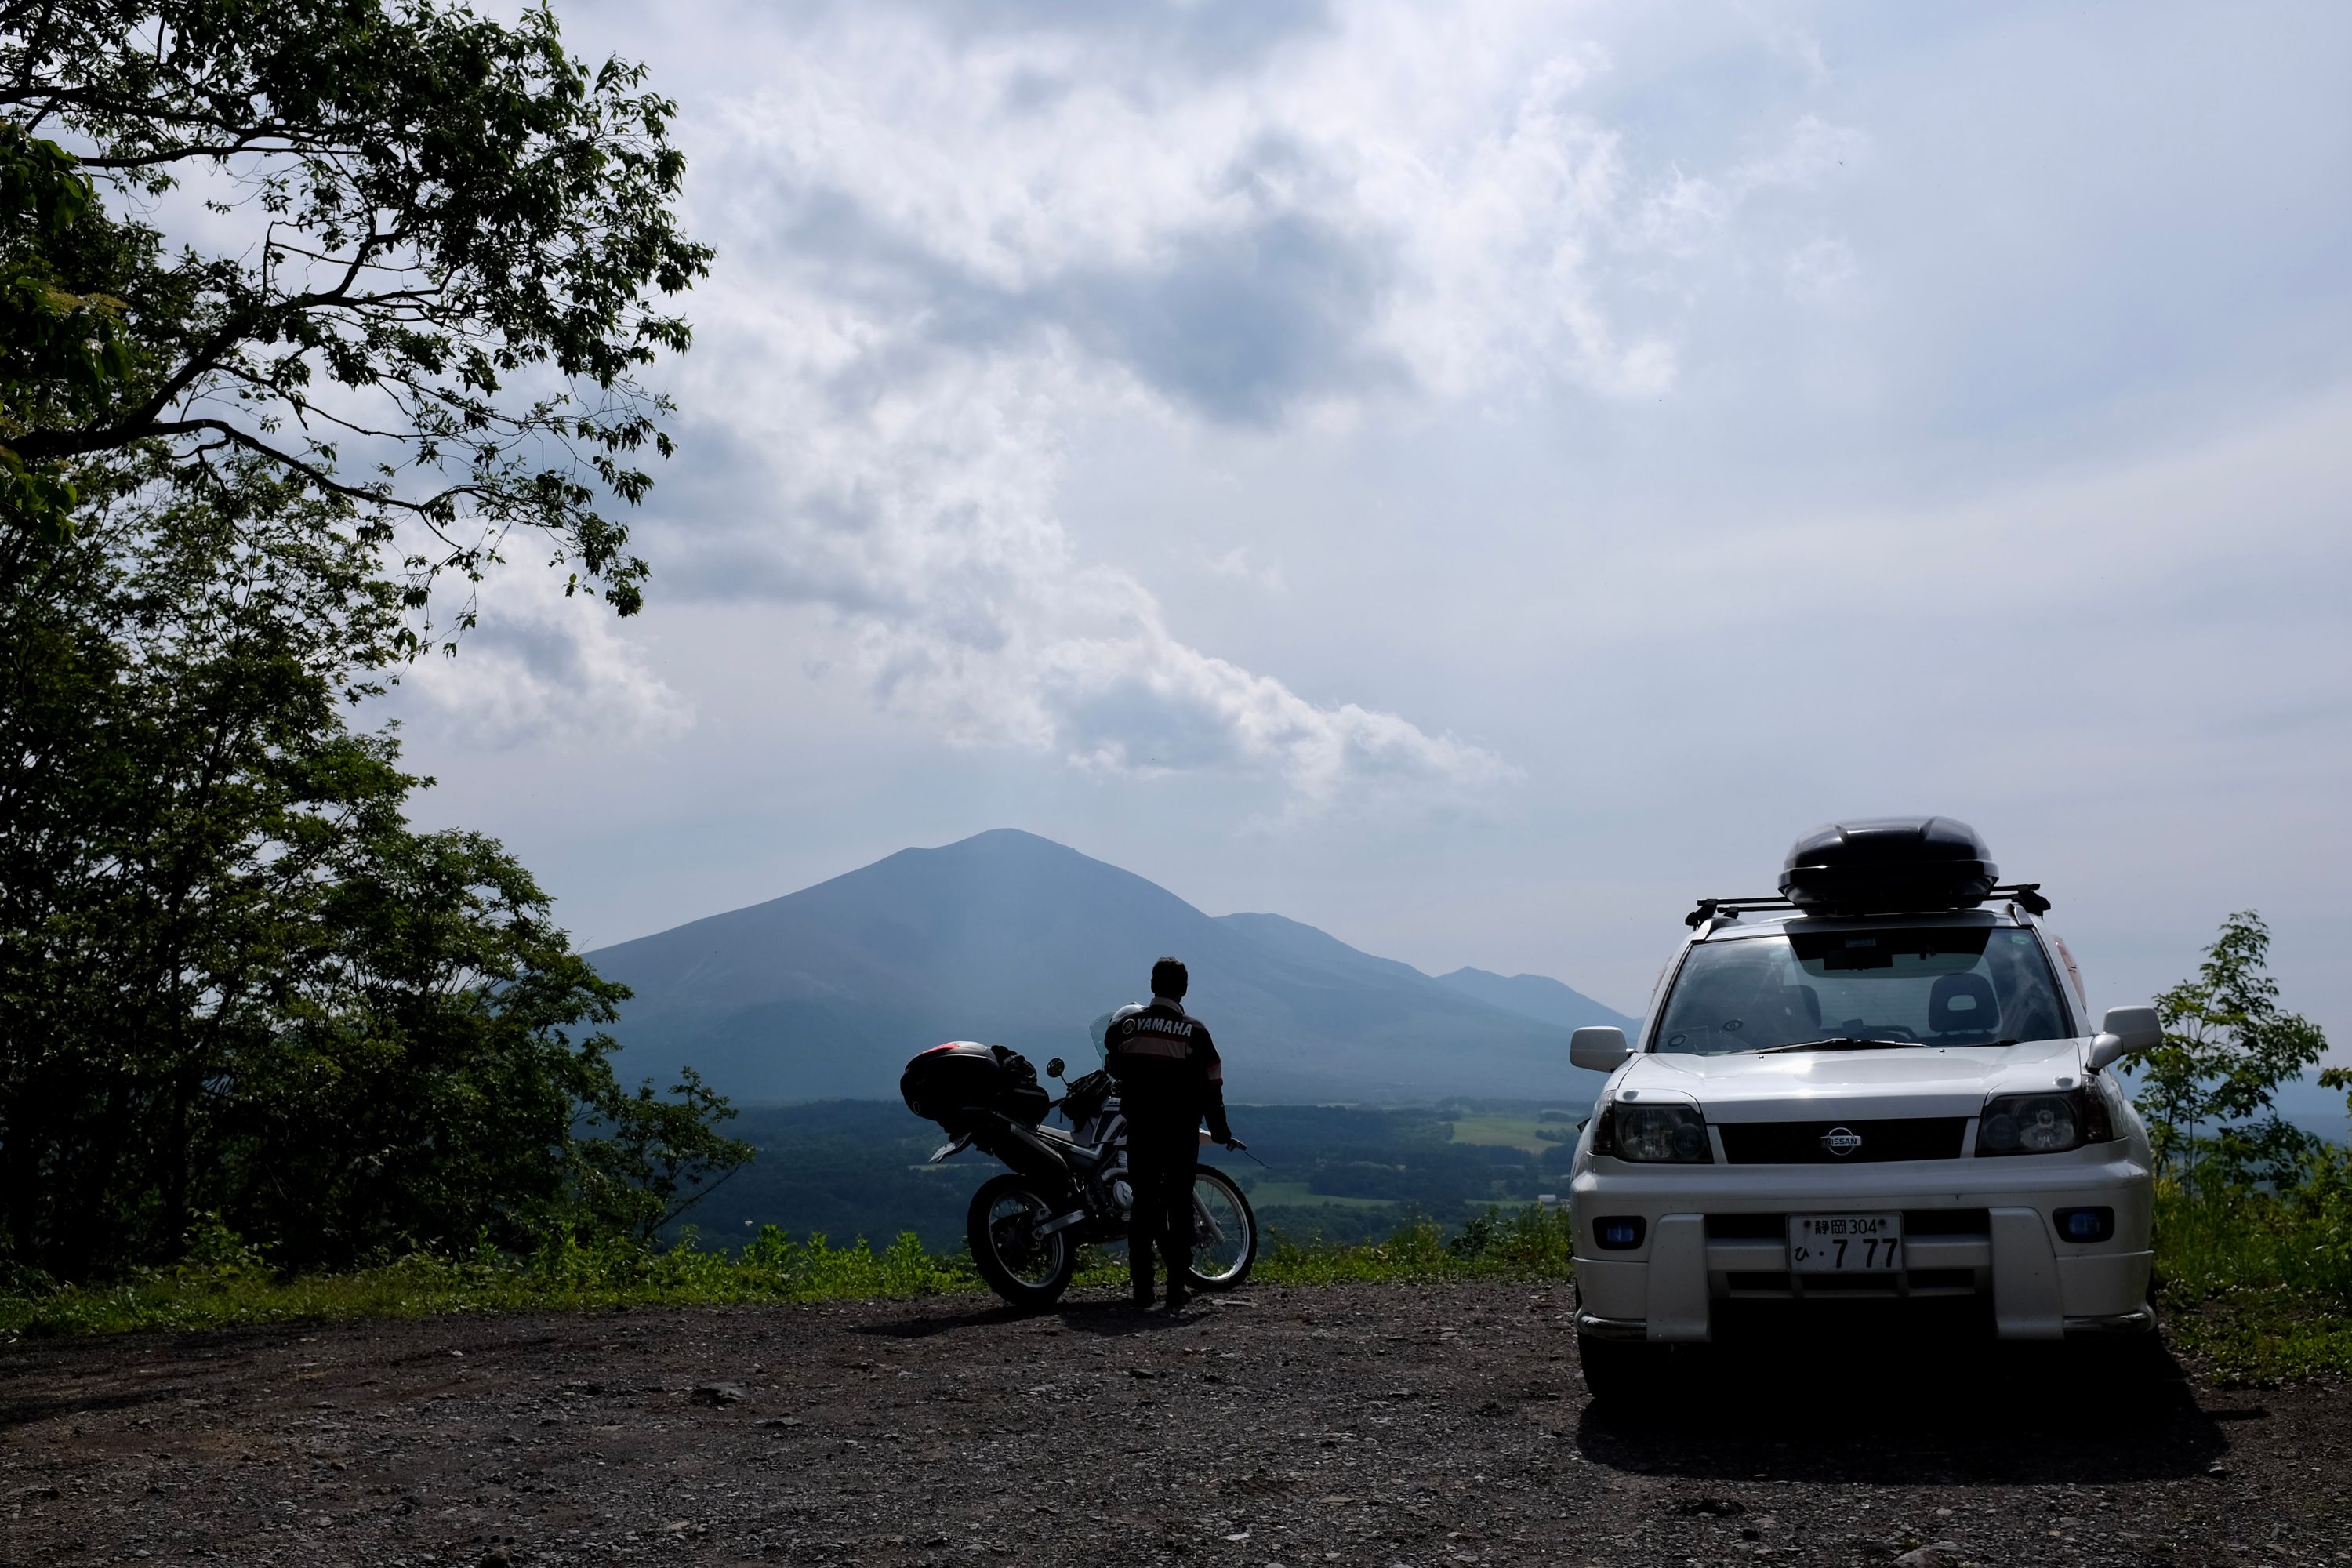 A man stands by his motorcycle and watches a big volcano, Mount Asama.